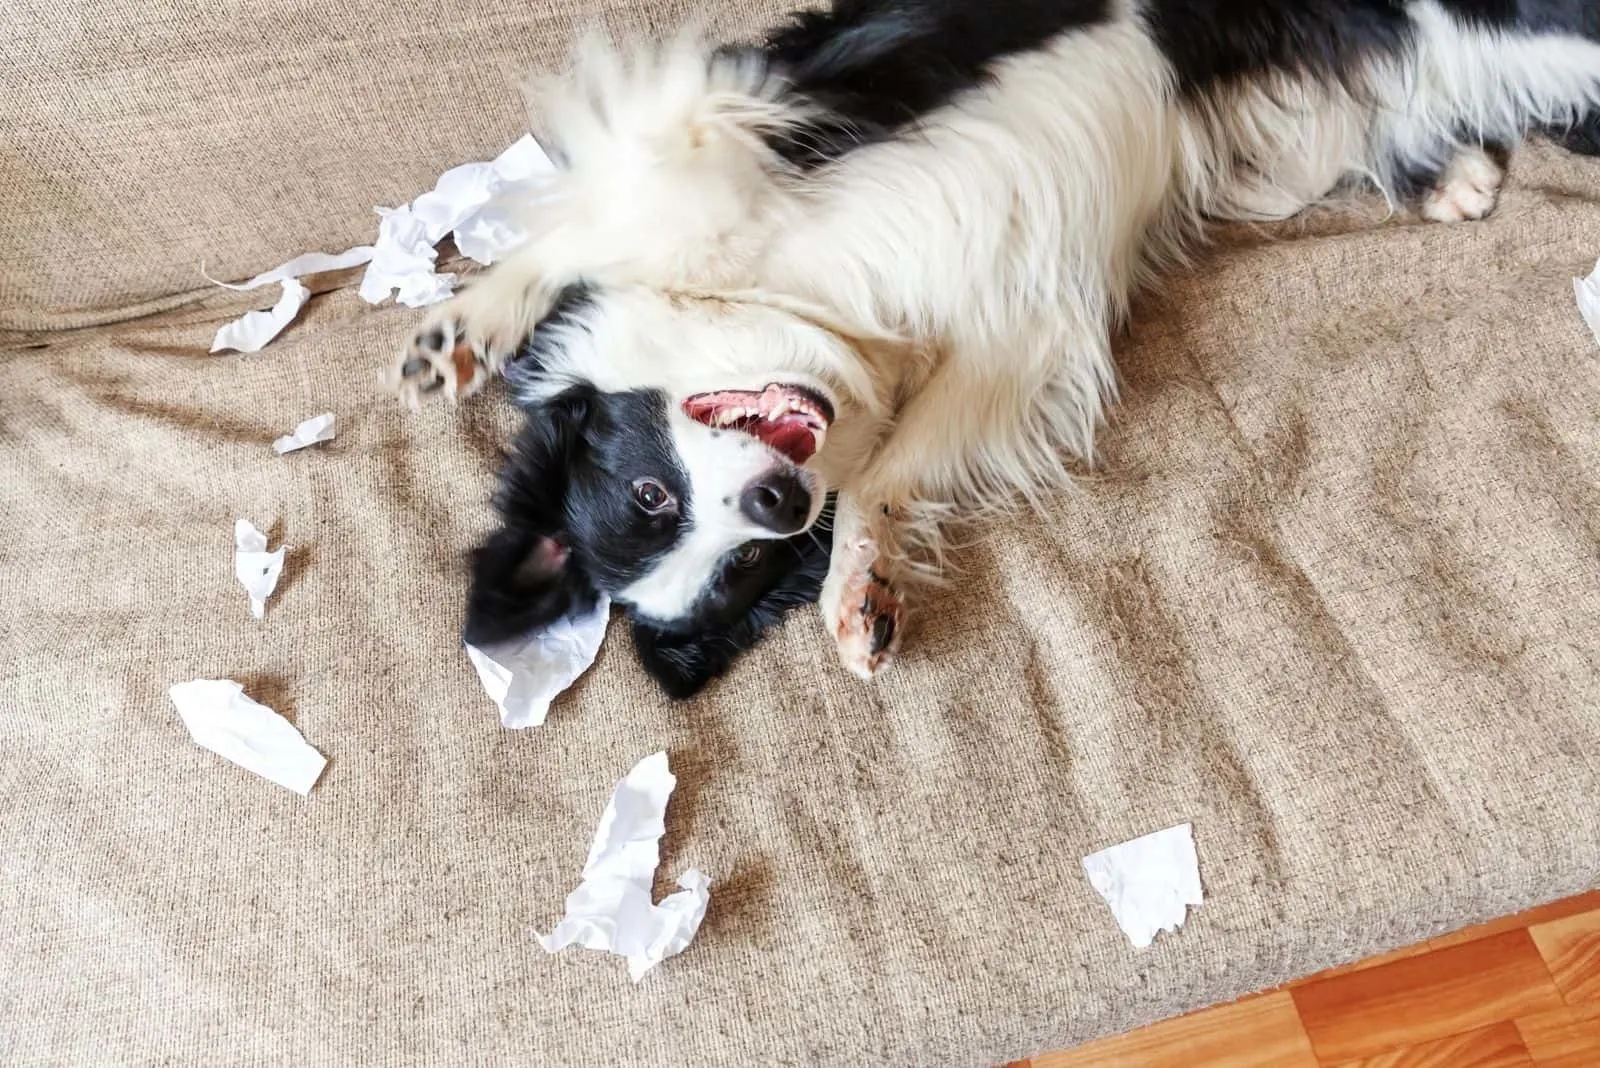 Naughty playful puppy dog border collie after mischief biting toilet paper lying on couch at home.